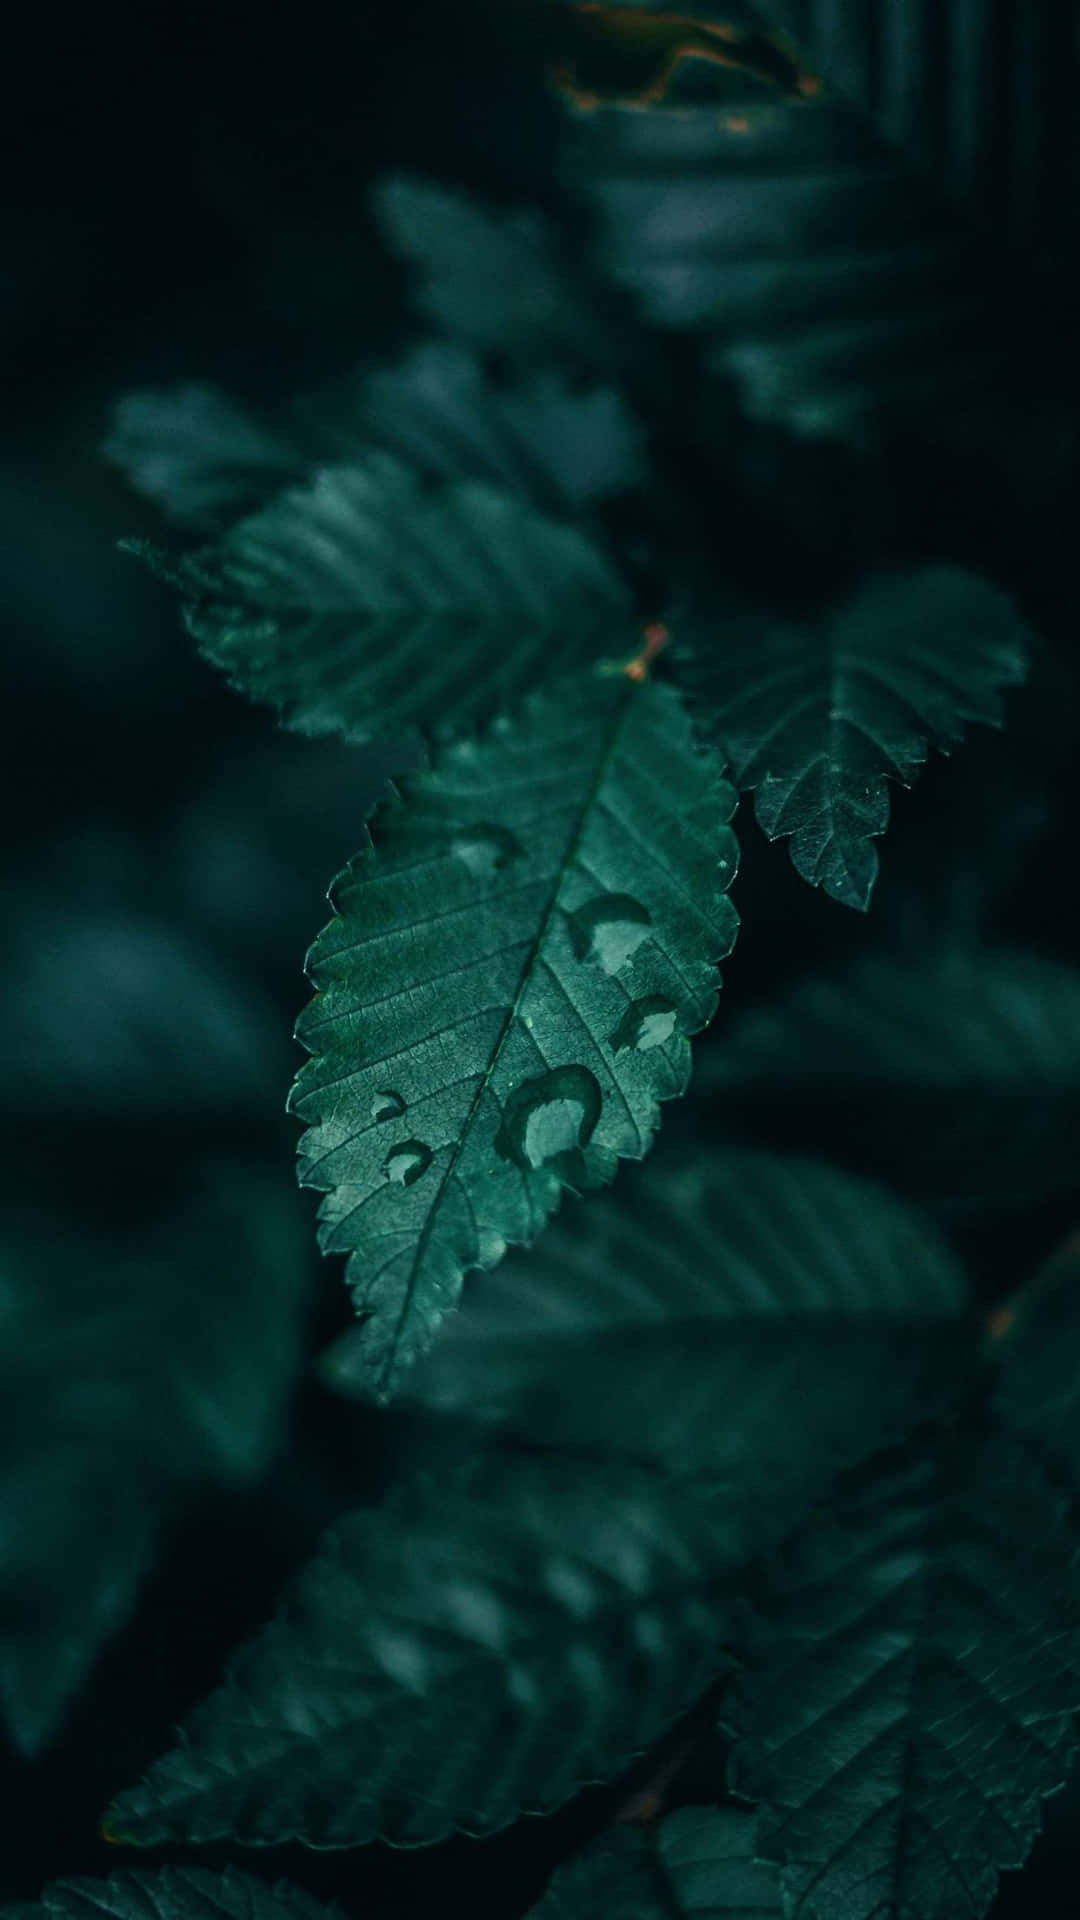 A Dark Green Leaf With Water Droplets On It